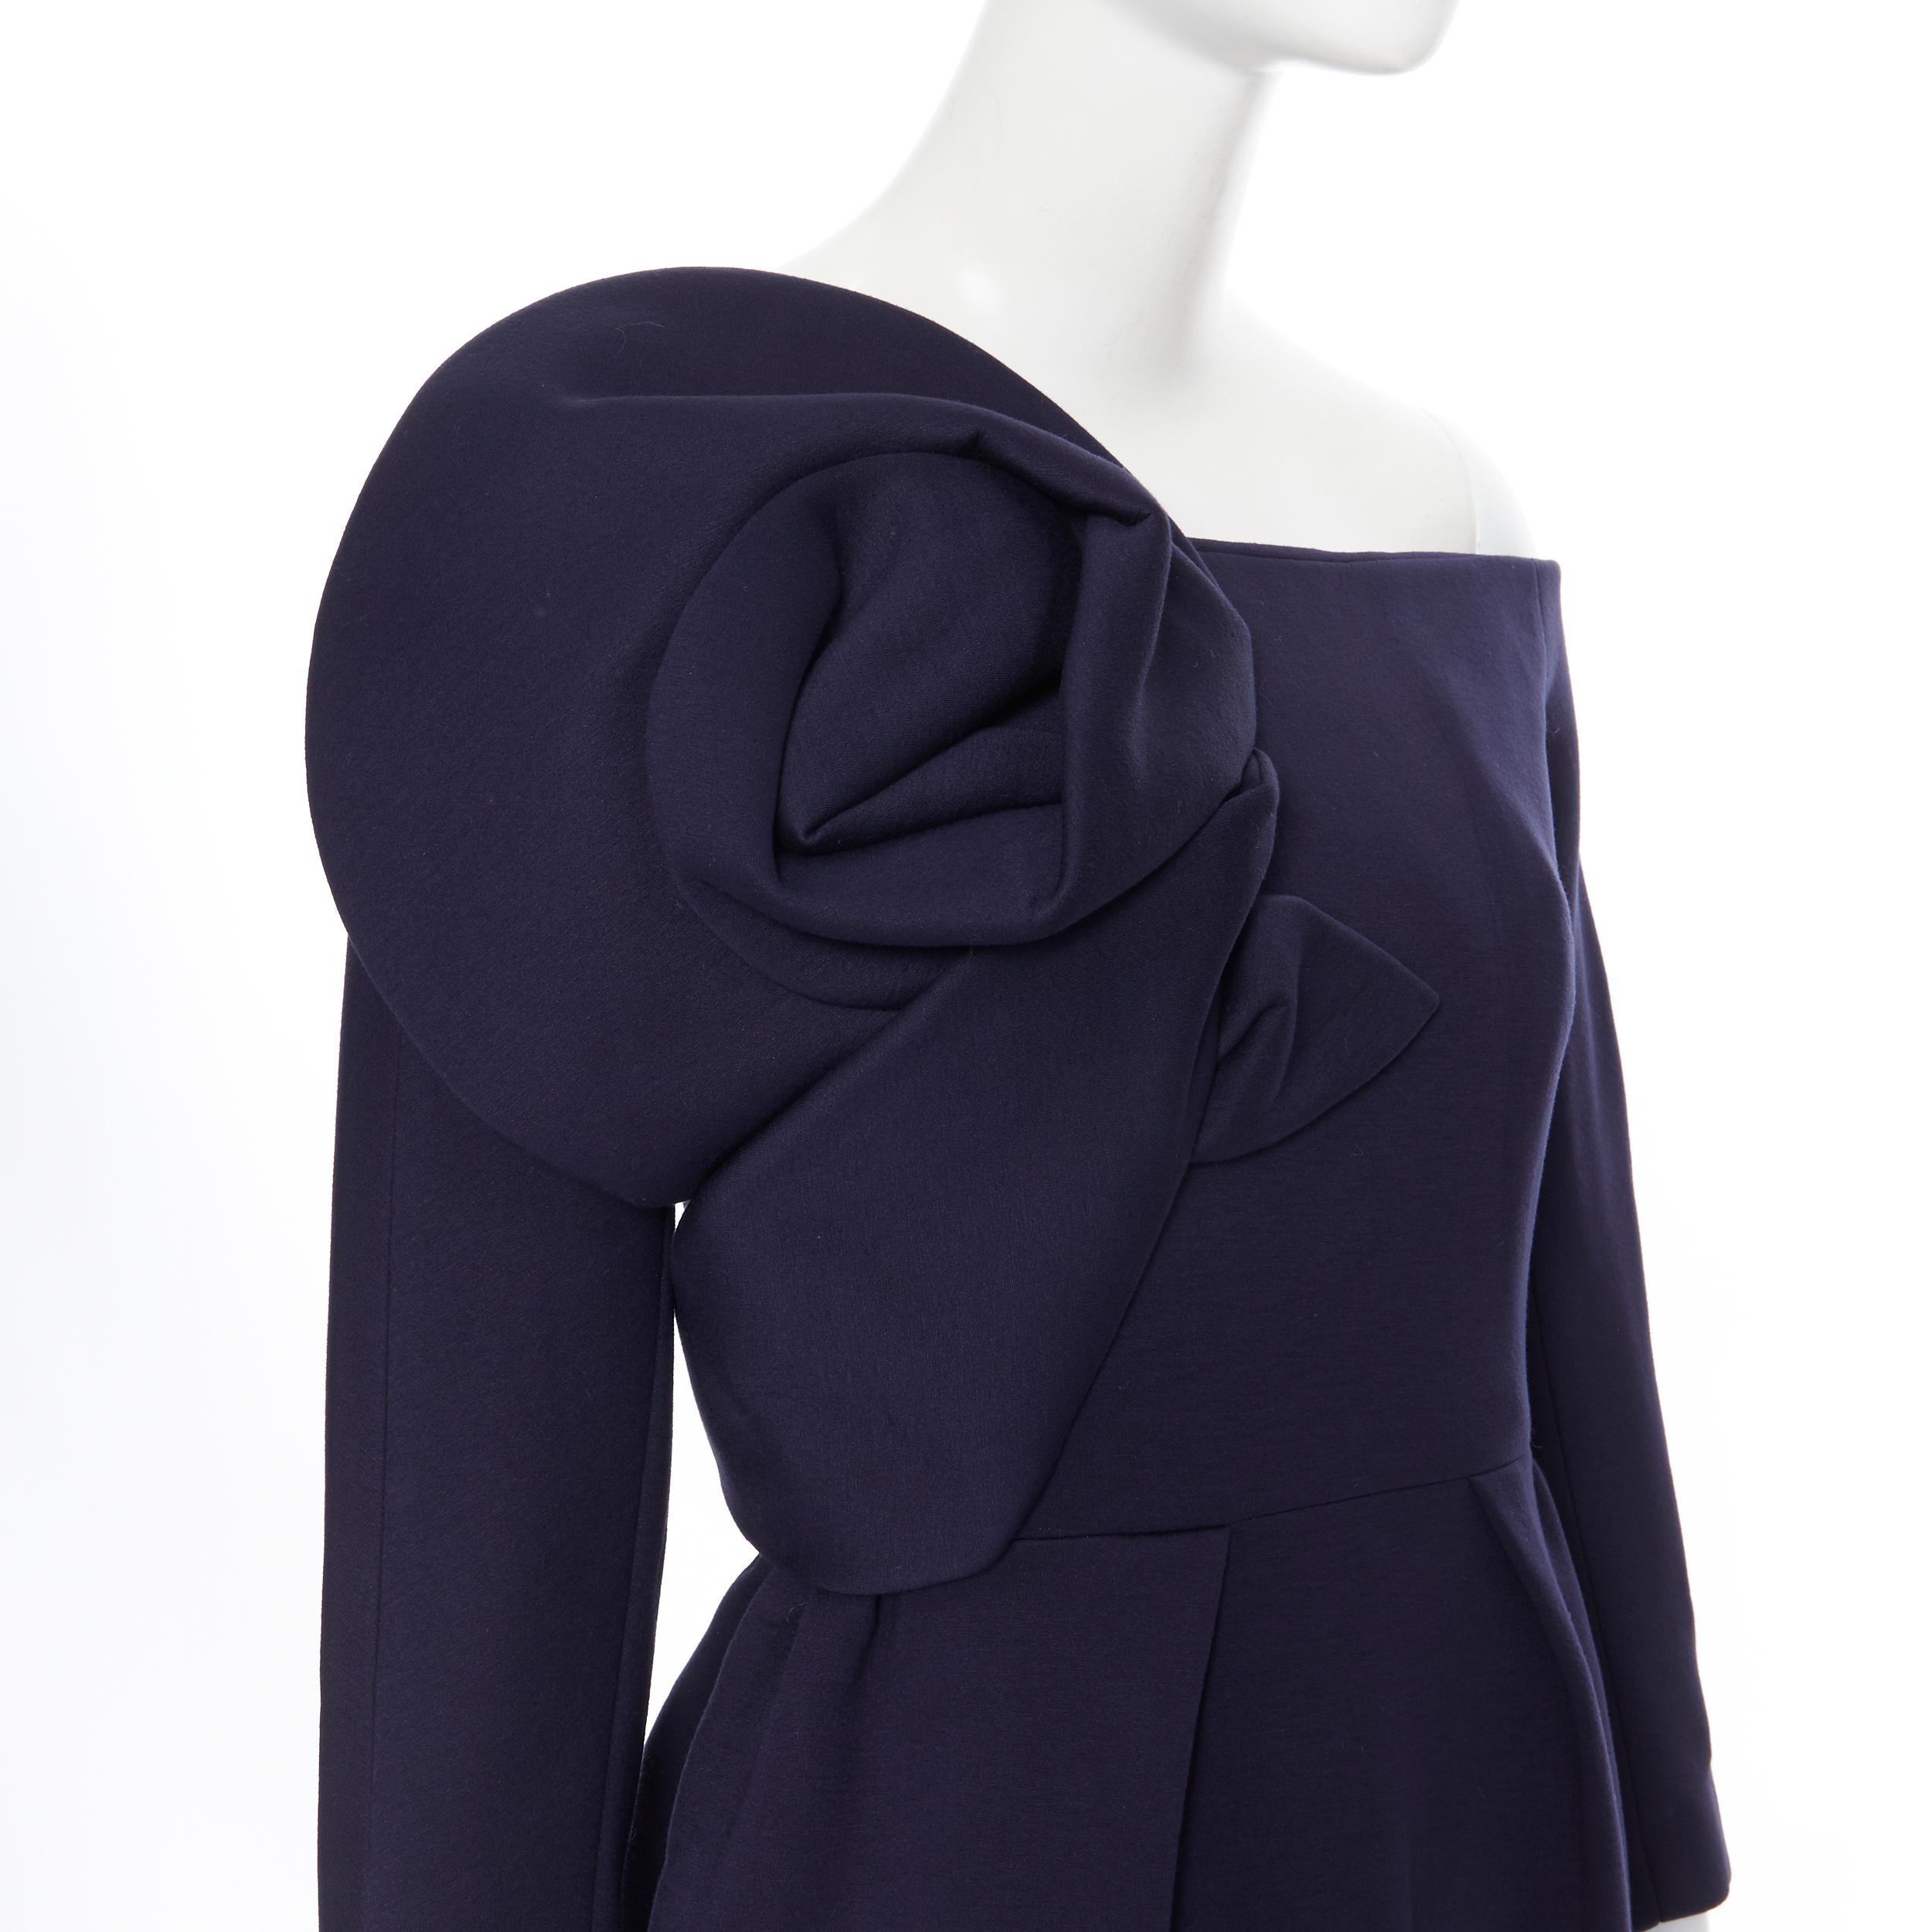 new DELPOZO navy jersey crepe large floral asymmetric neckline dress FR34 XS
Brand: Delpozo
Model Name / Style: Delpozo
Material: Viscose
Color: Navy
Pattern: Solid
Closure: Zip
Extra Detail: Large decorative 3D flower on right shoulder. Open